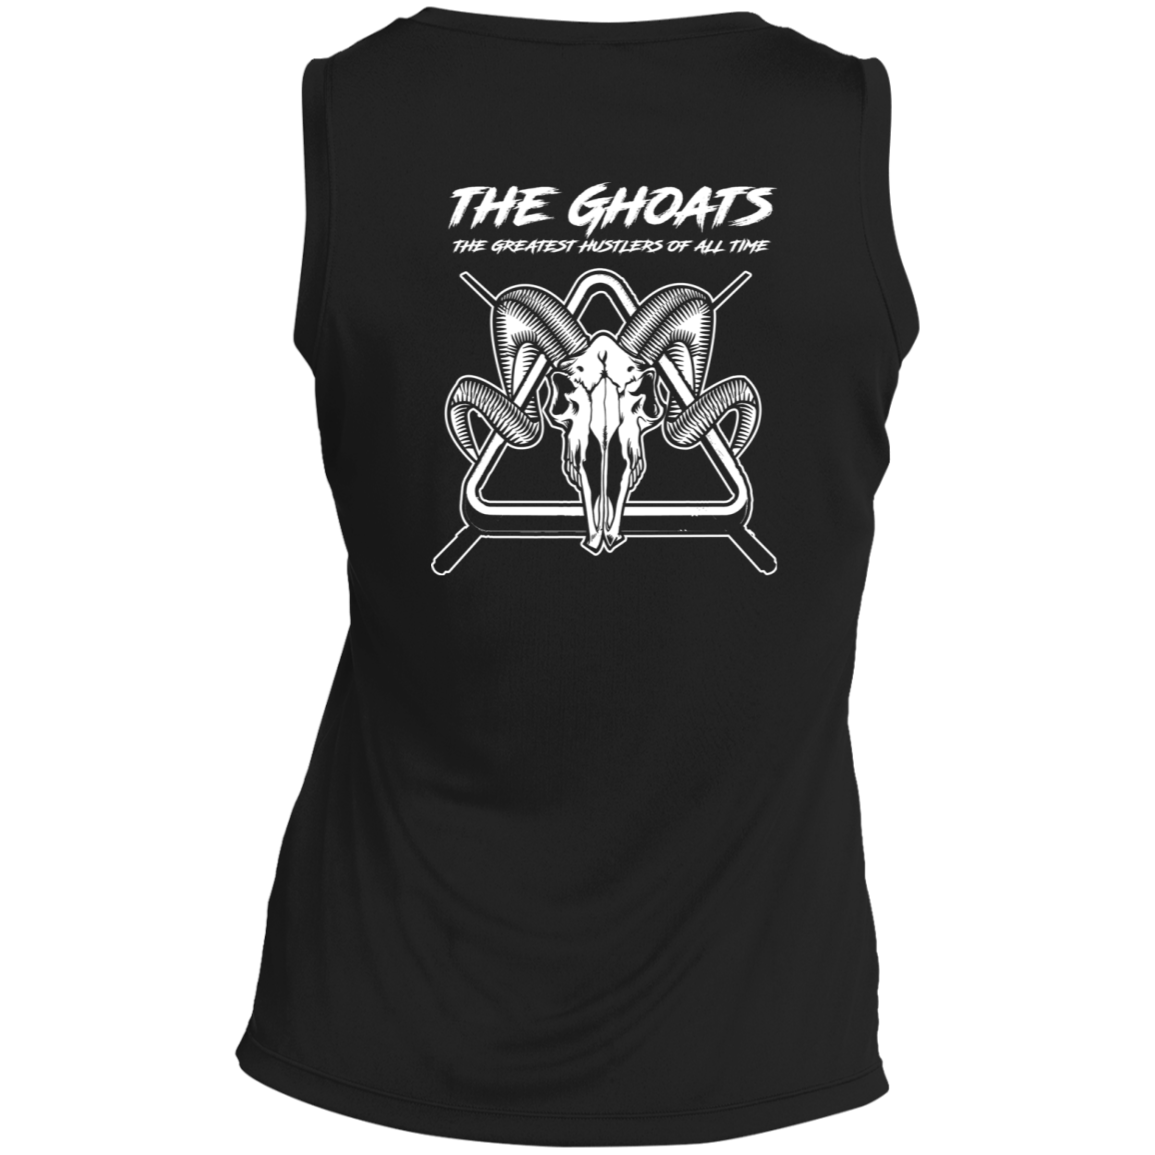 The GHOATS Custom Design #28. Shoot Pool. Ladies' 100% polyester interlock with PosiCharge technology